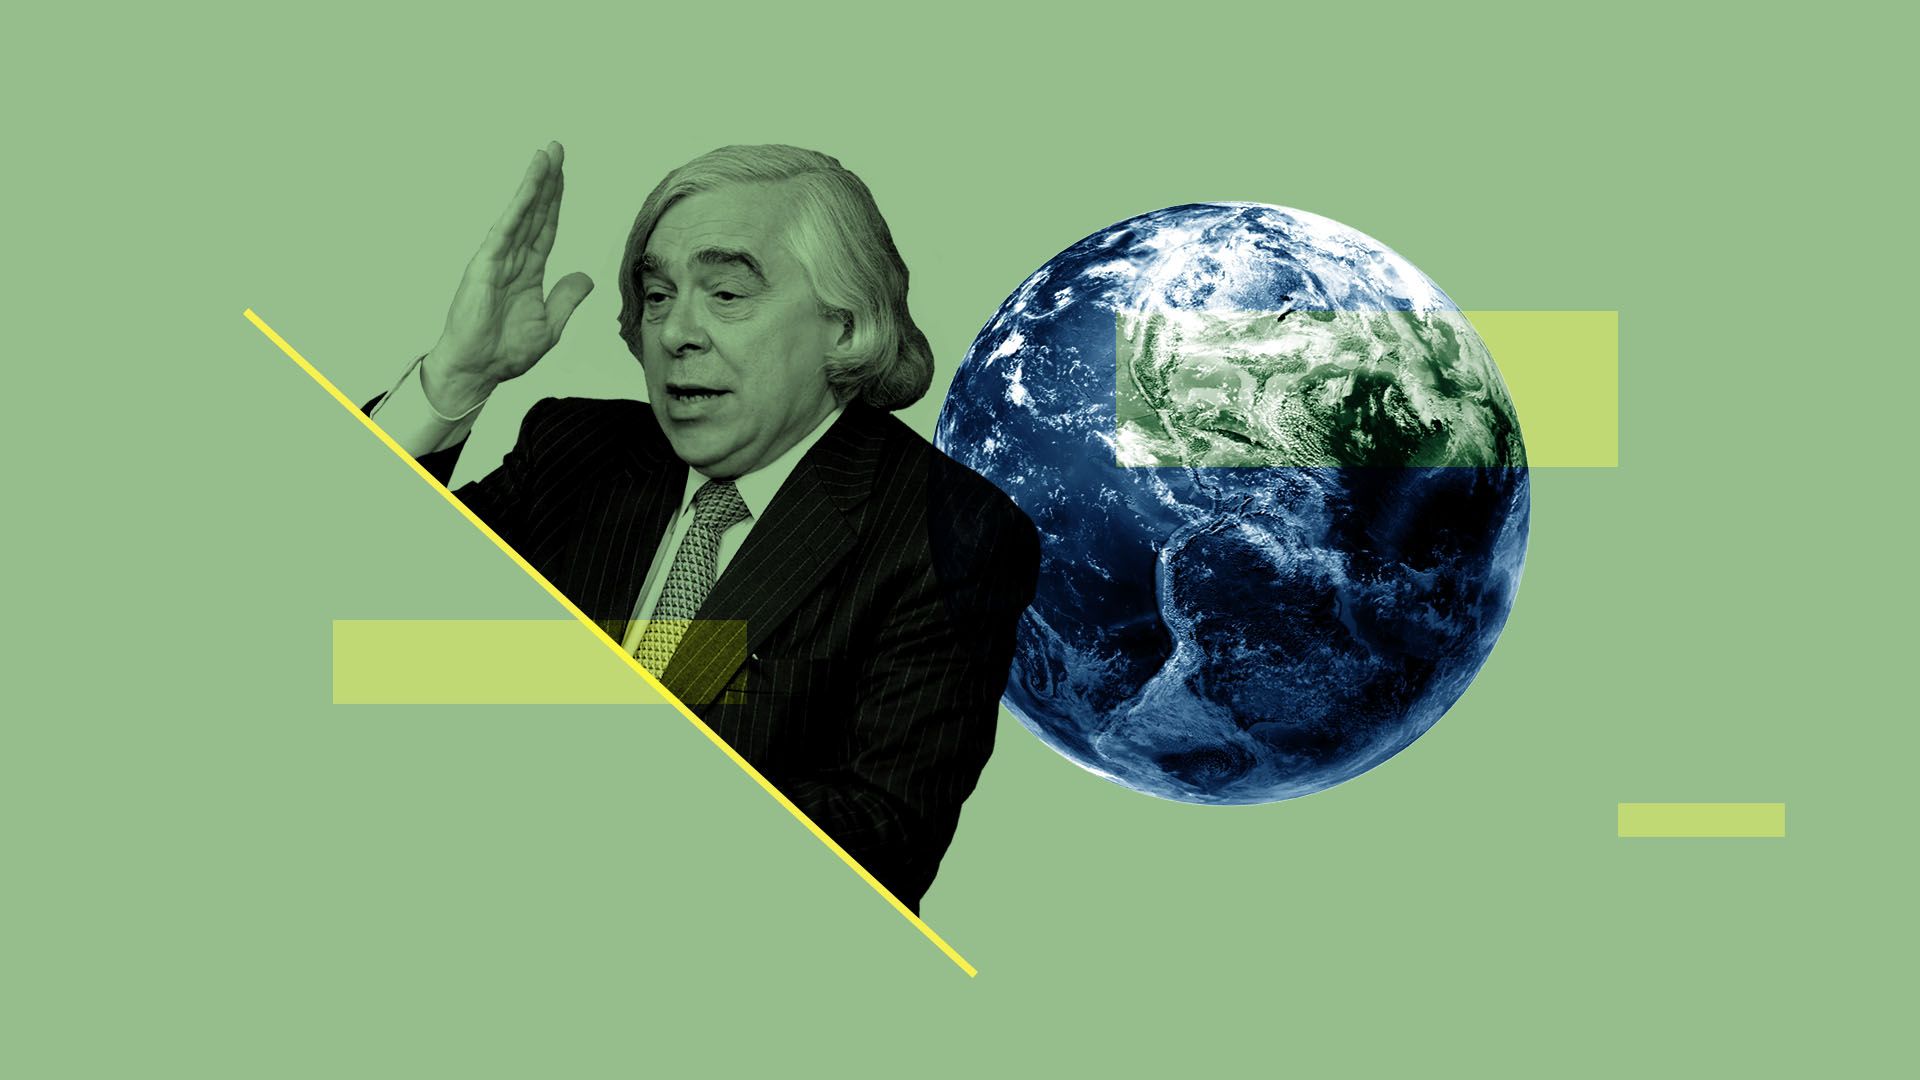 Illustrated collage Ernest Moniz and the planet earth